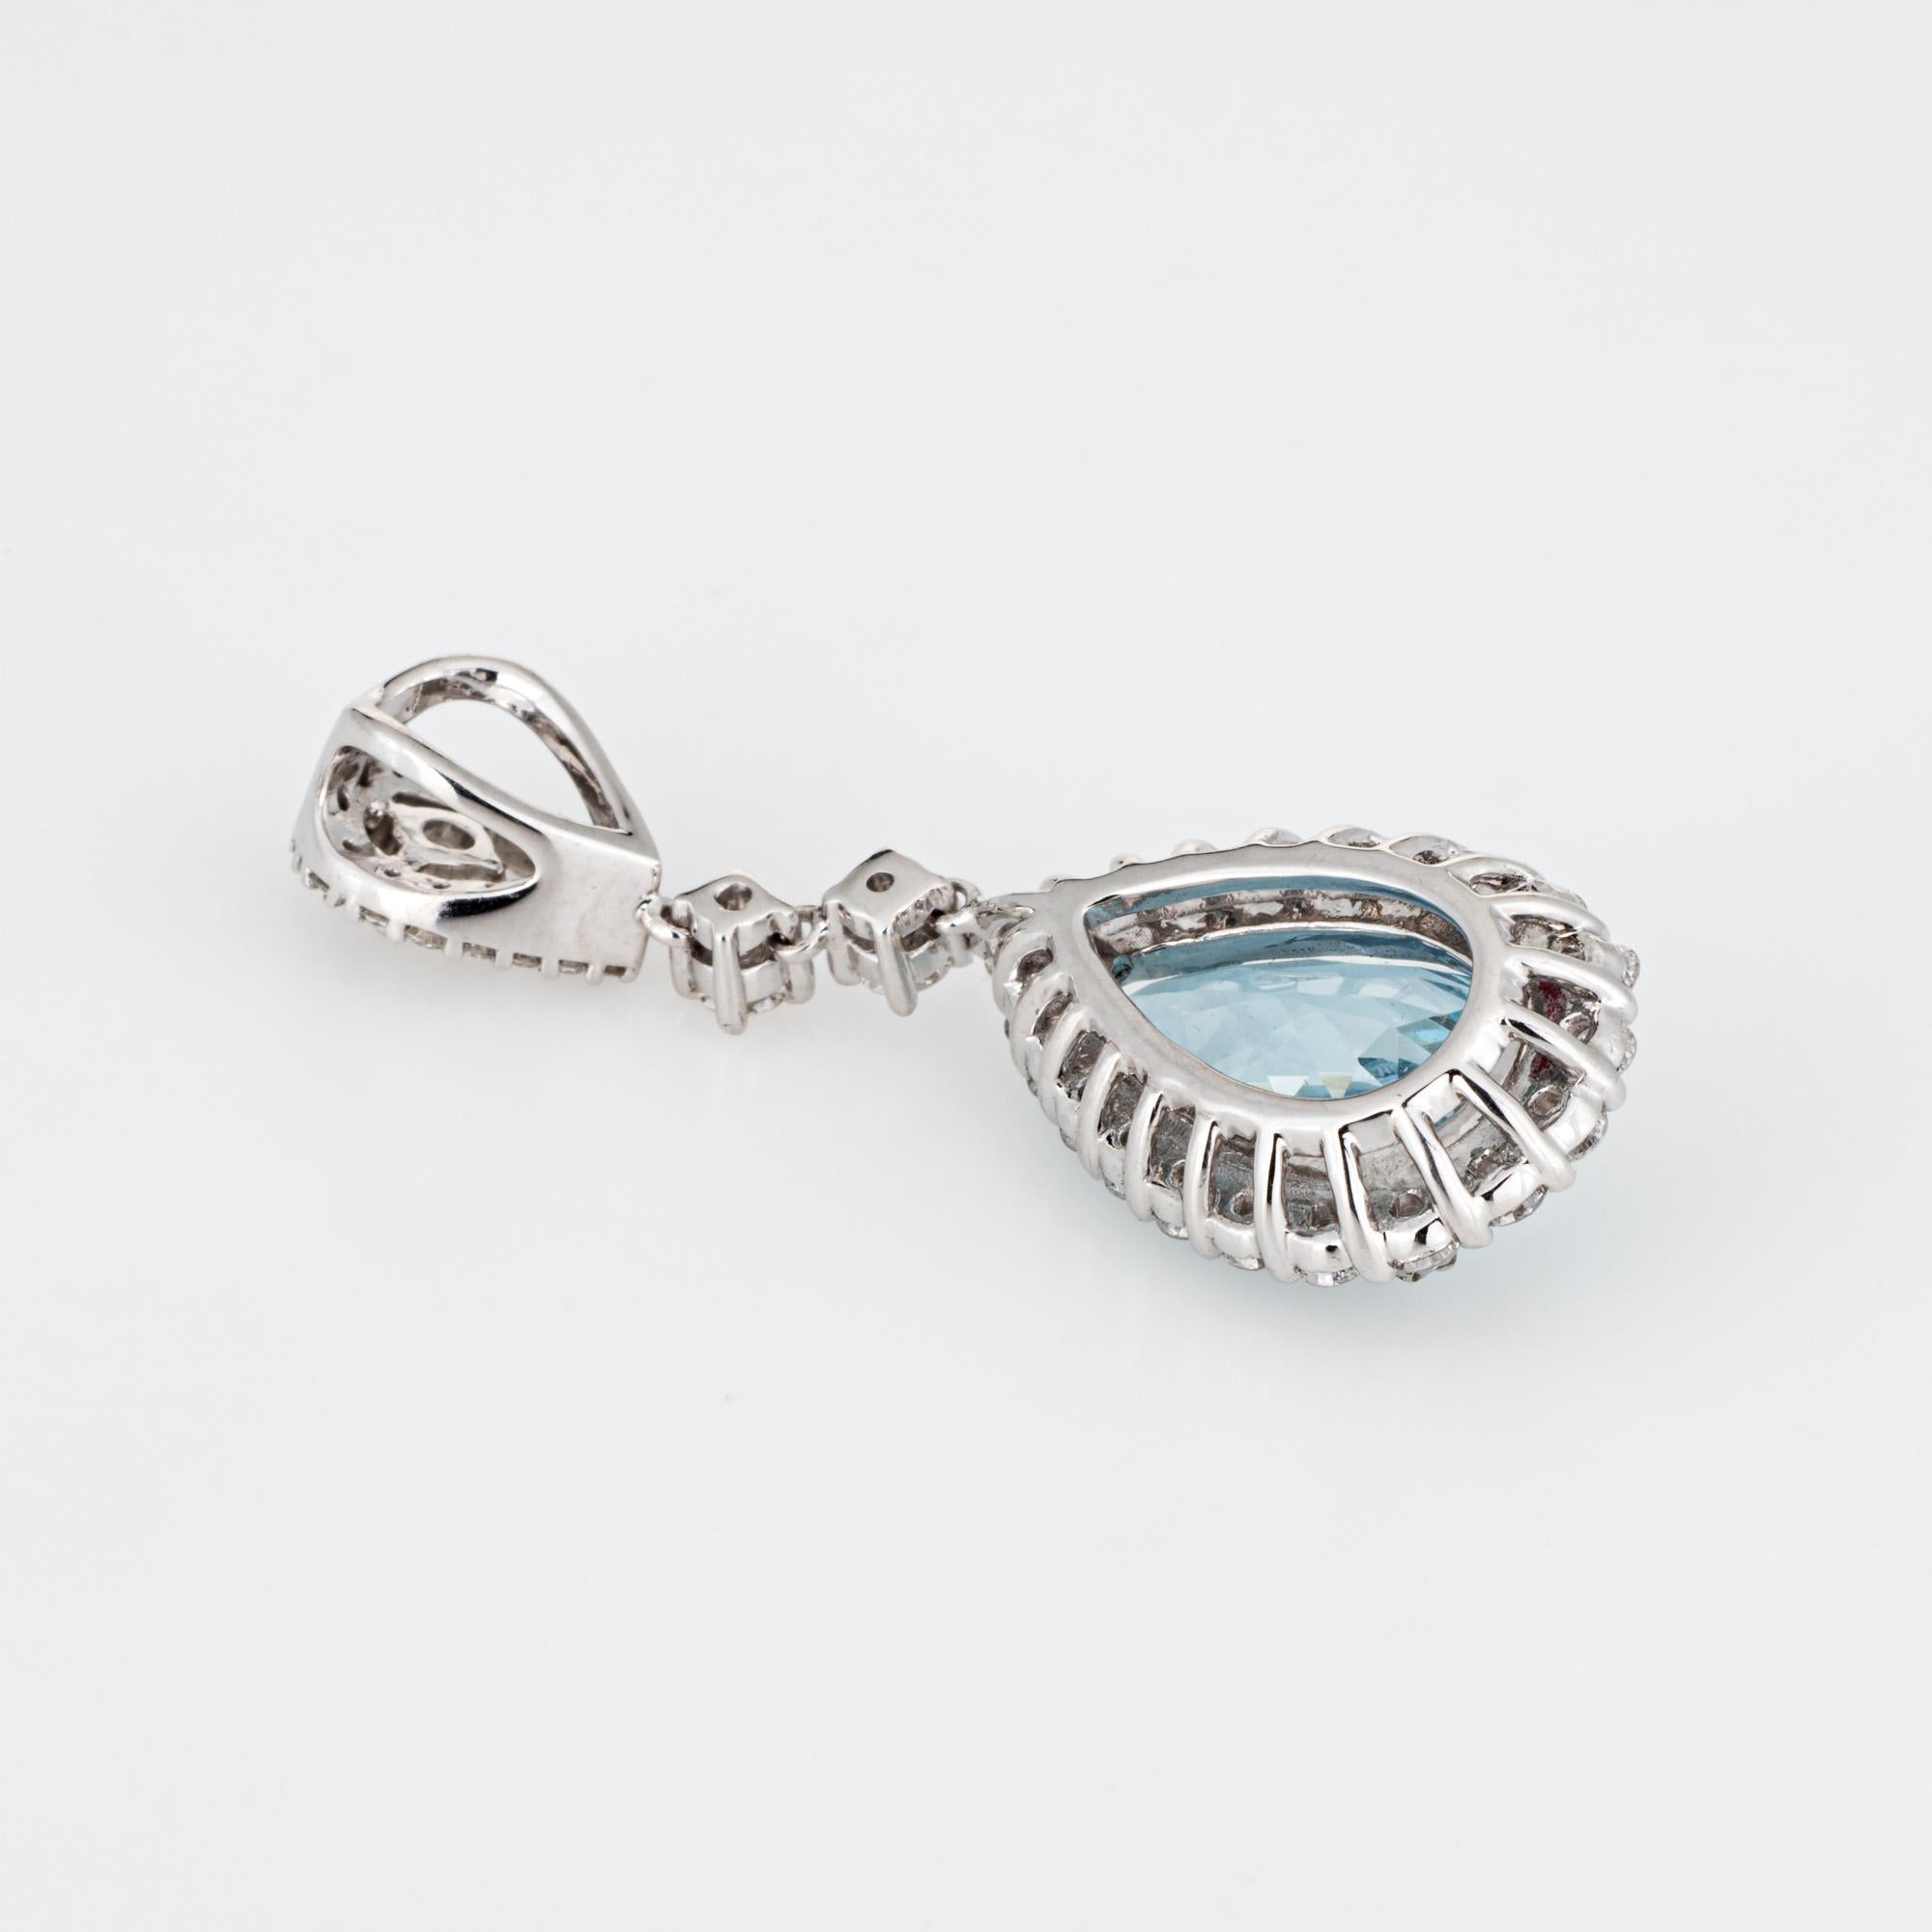 Stylish aquamarine & diamond pendant crafted in 18 karat white gold. 

Faceted pear cut aquamarine is estimated at 3.35 carats. Diamonds total an estimated 0.50 carats (estimated at H-I color and VS2-SI2 clarity). 

The elegant contemporary pendant